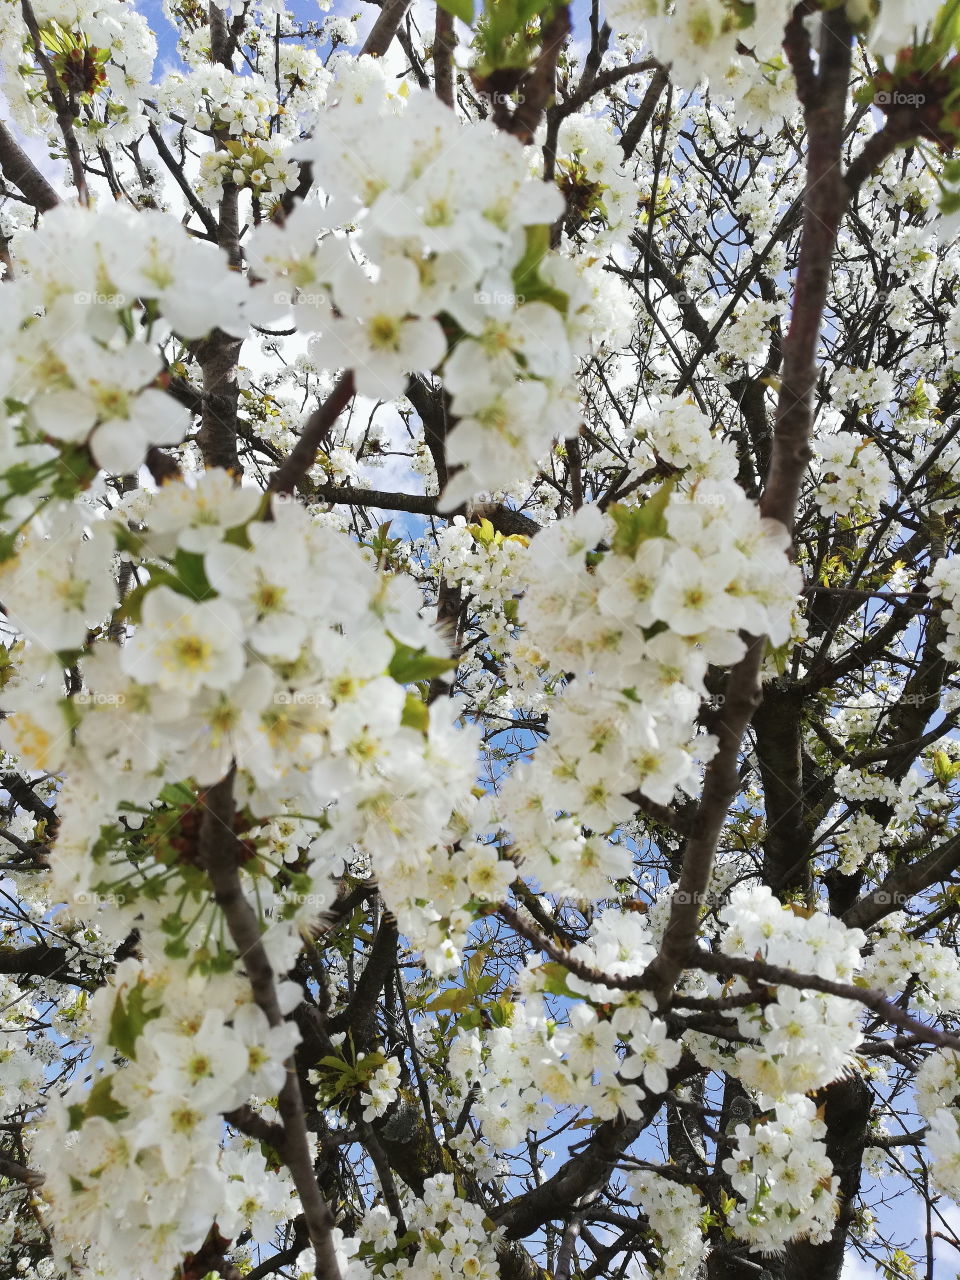 Walking under this white petaly cherry tree. You can almost feel sunshine breaching through those little branches and bumblebees buzzing around. Springtime is awesome!